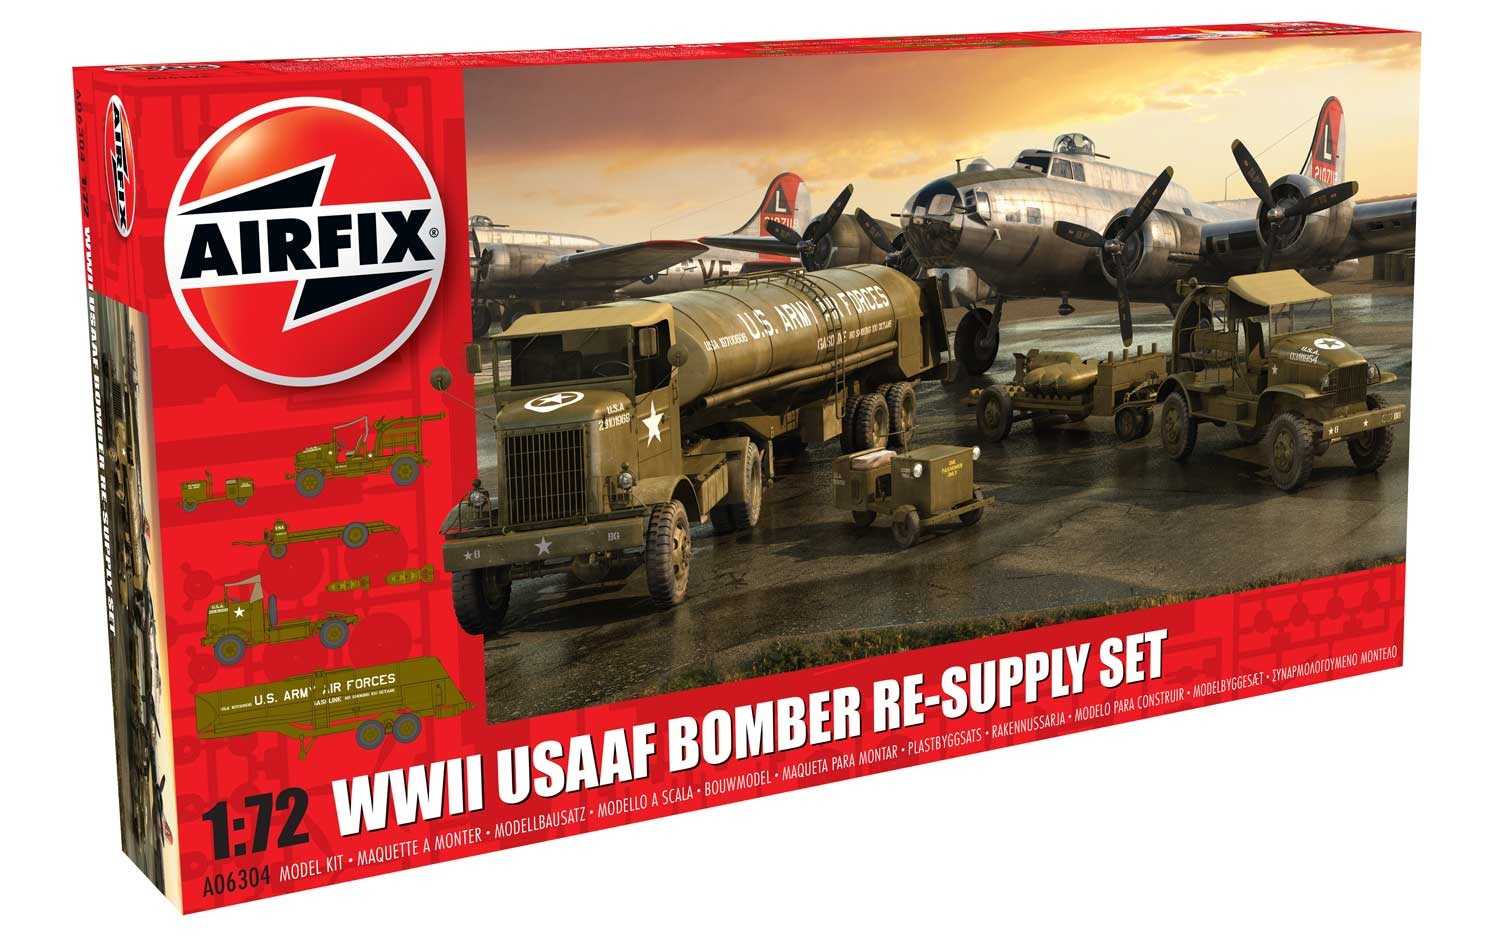 Fotografie Classic Kit diorama A06304 - USAAF 8TH Airforce Bomber Resupply Set (1:72)